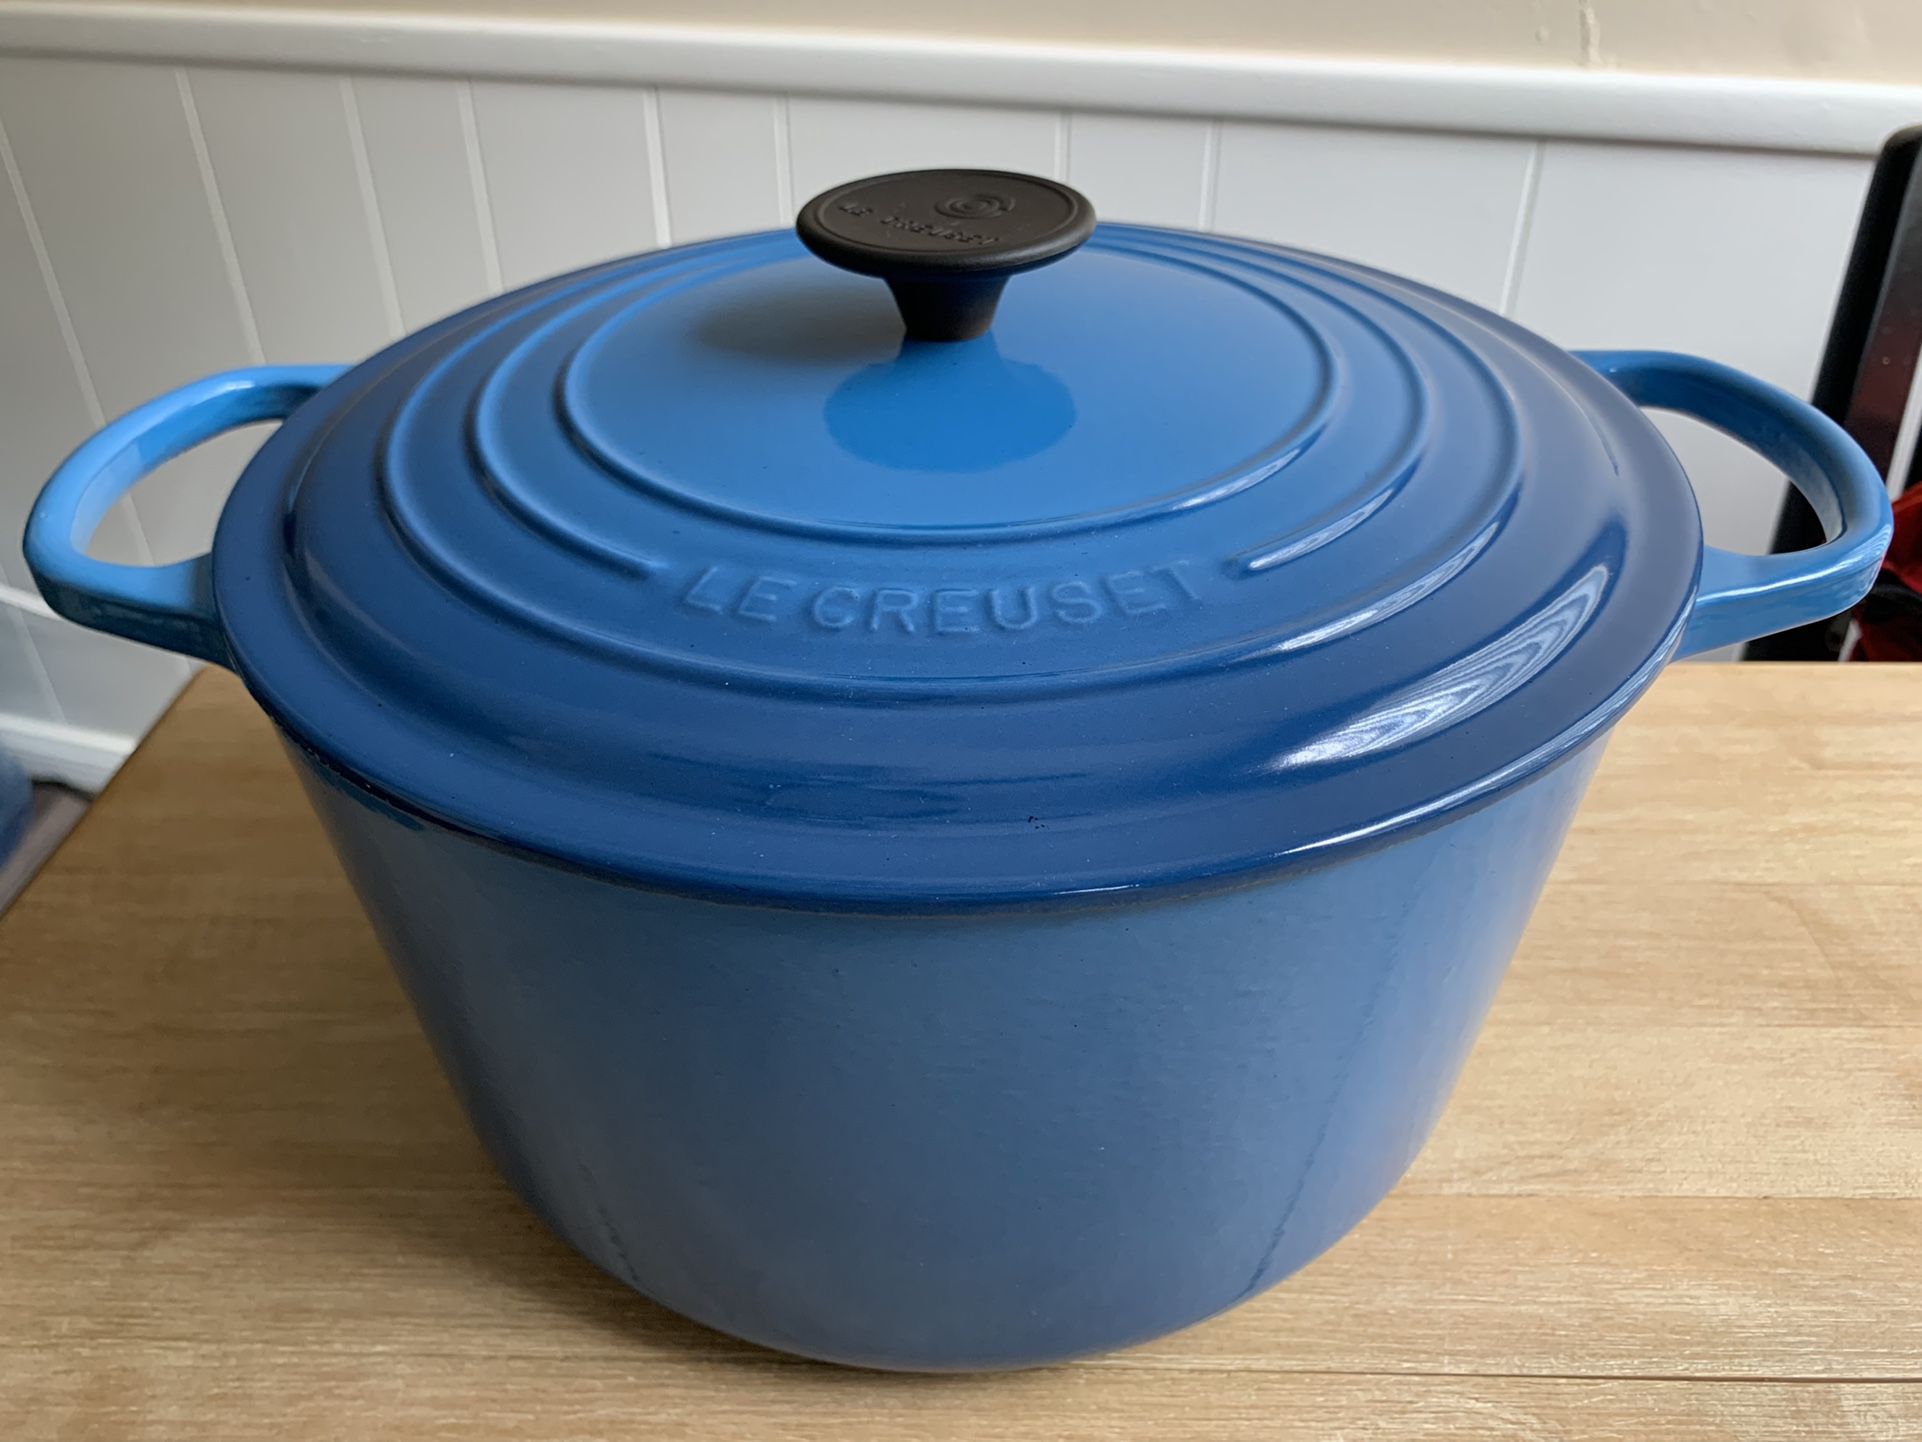 Le Creuset Deep Dutch Oven for Sale in San Diego, CA - OfferUp